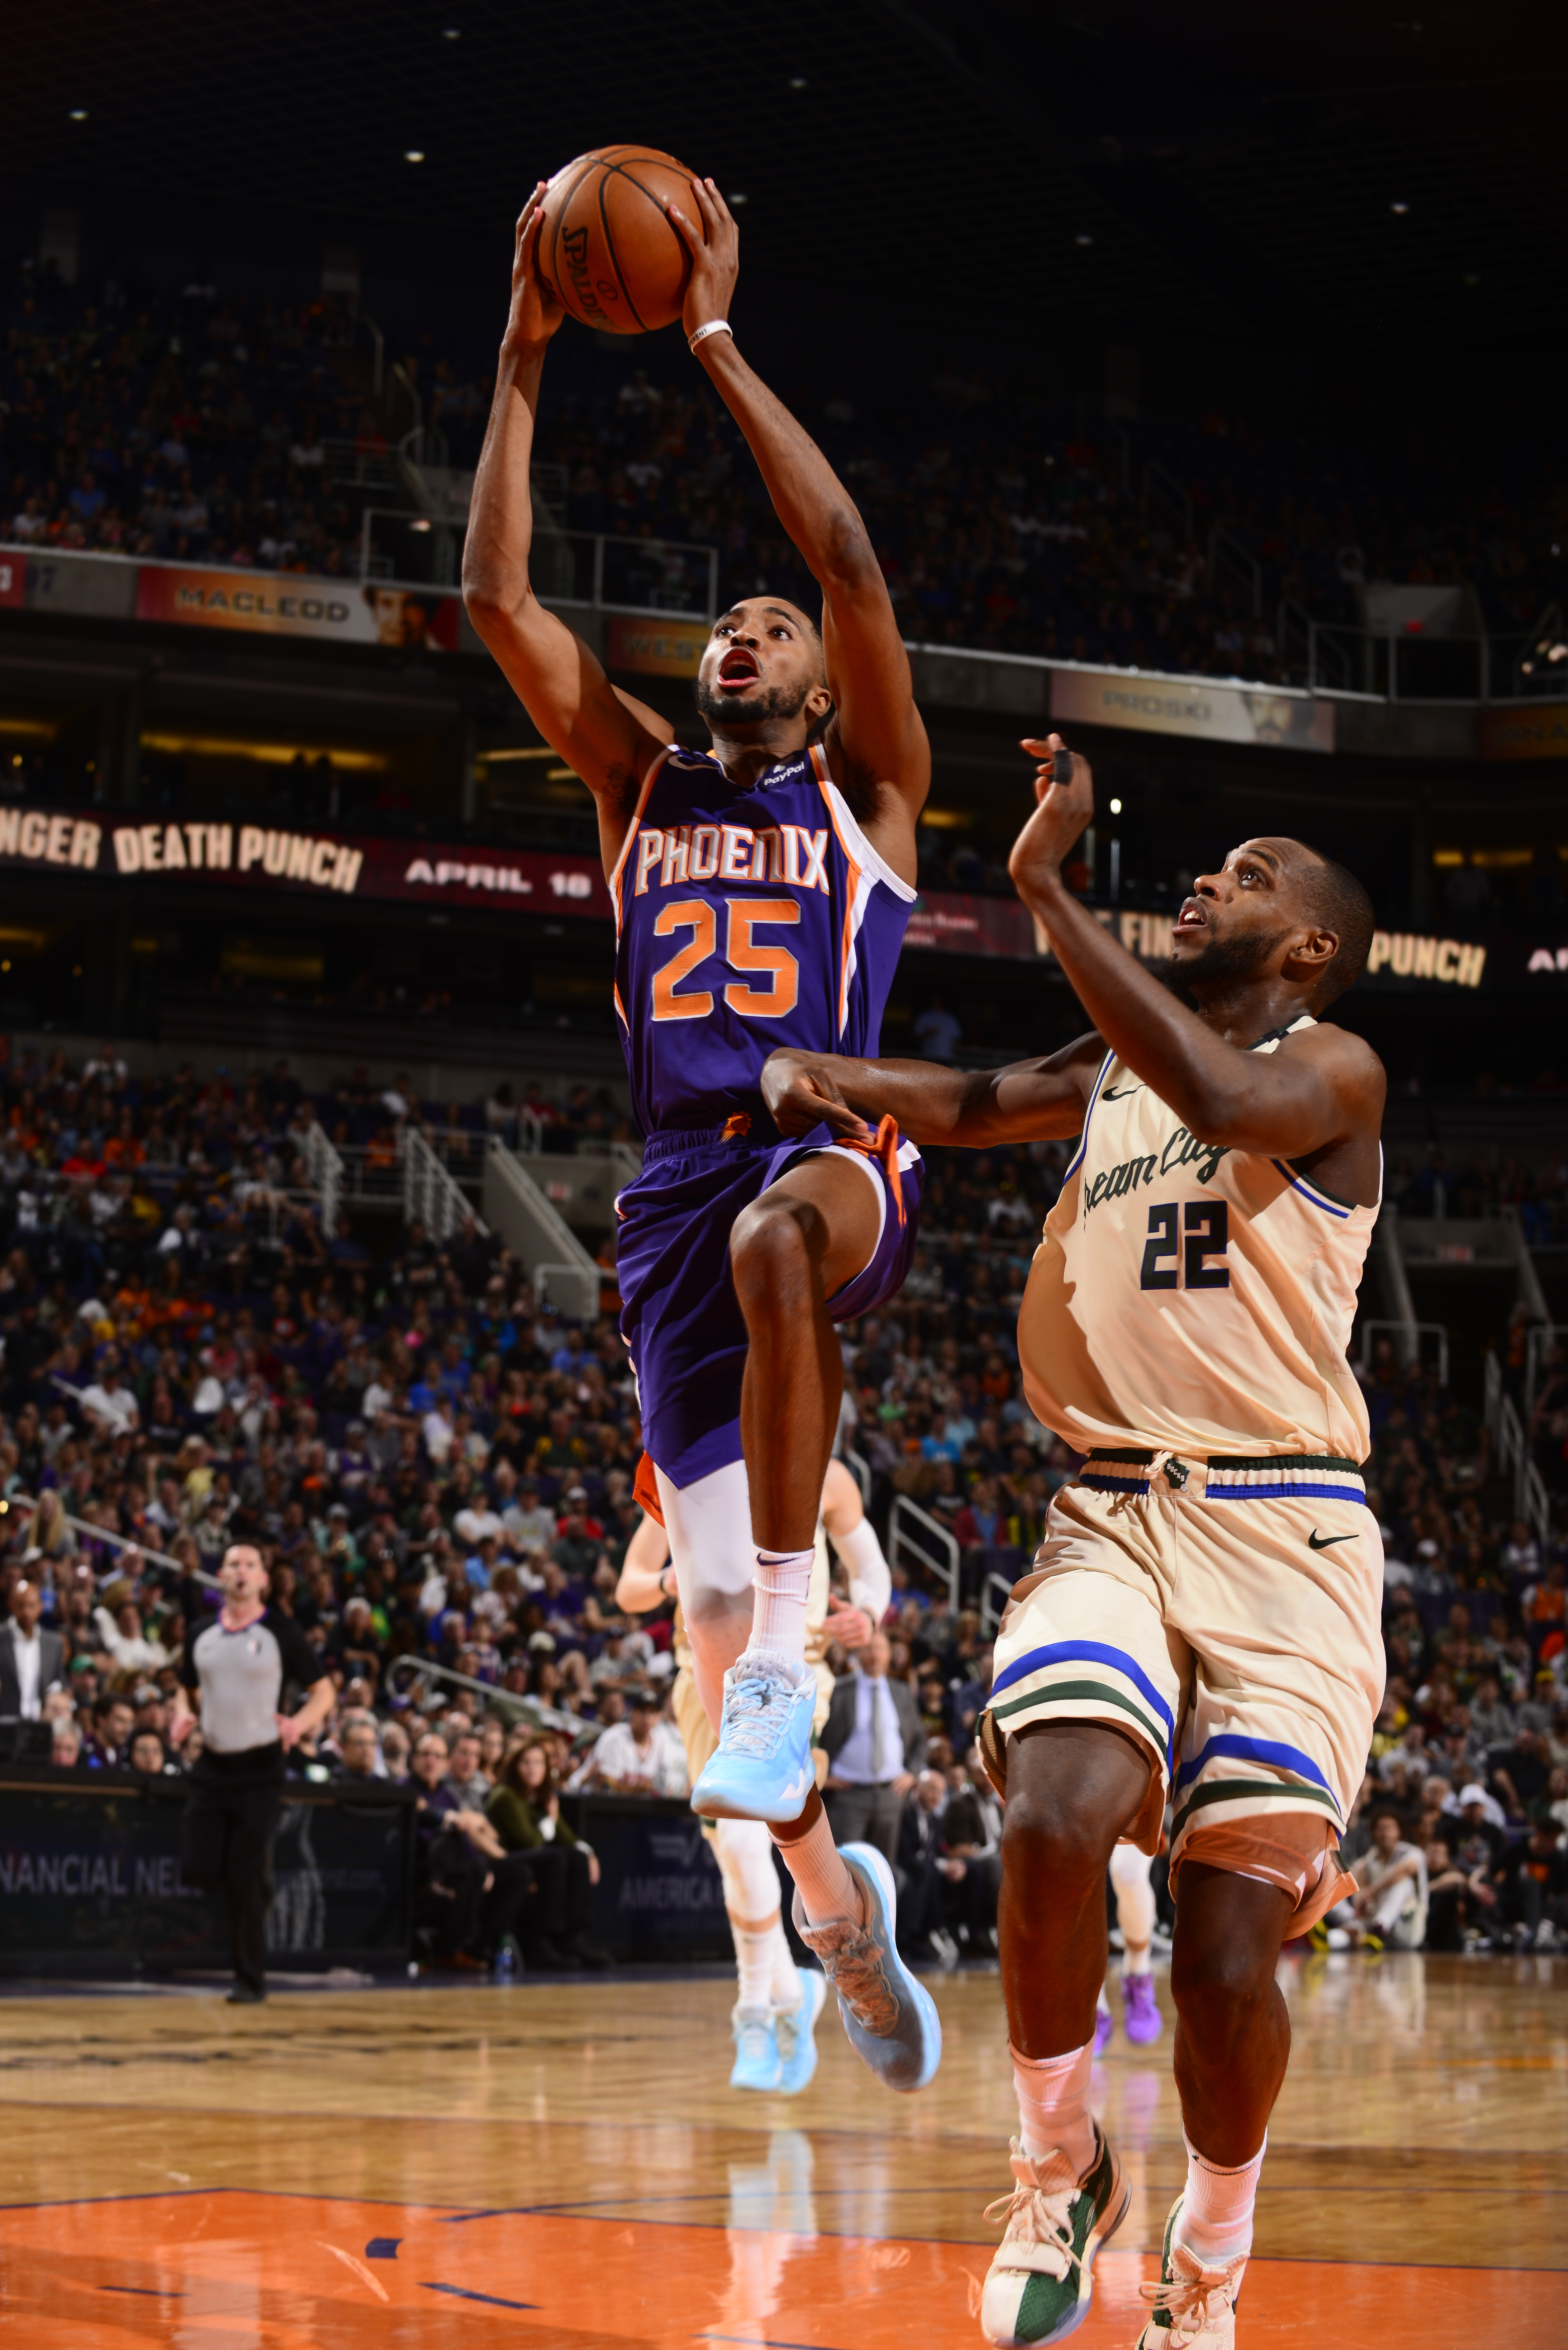 PHOENIX, AZ - MARCH 8: Mikal Bridges #25 of the Phoenix Suns shoots the ball against the Milwaukee Bucks on March 8, 2020 at Talking Stick Resort Arena in Phoenix, Arizona. NOTE TO USER: User expressly acknowledges and agrees that, by downloading and or using this photograph, user is consenting to the terms and conditions of the Getty Images License Agreement. Mandatory Copyright Notice: Copyright 2020 NBAE   Barry Gossage/NBAE via Getty Images/AFP